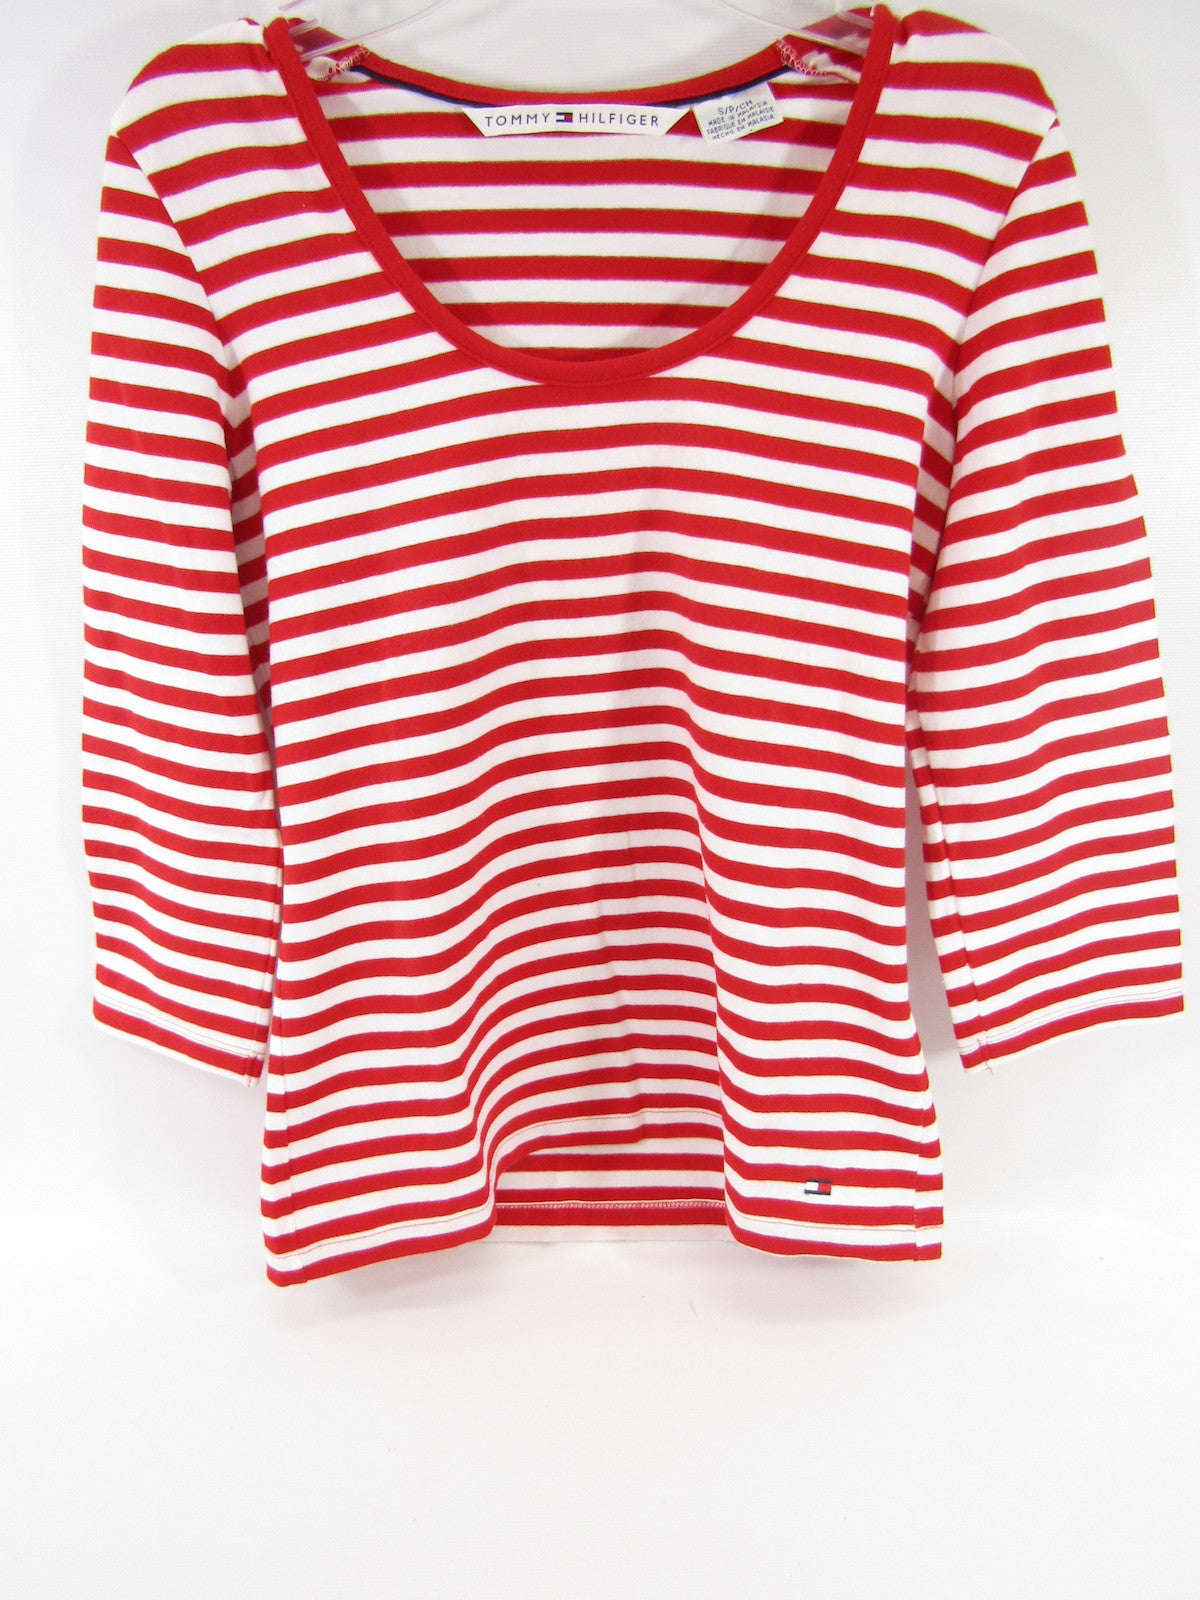 red white striped t shirt